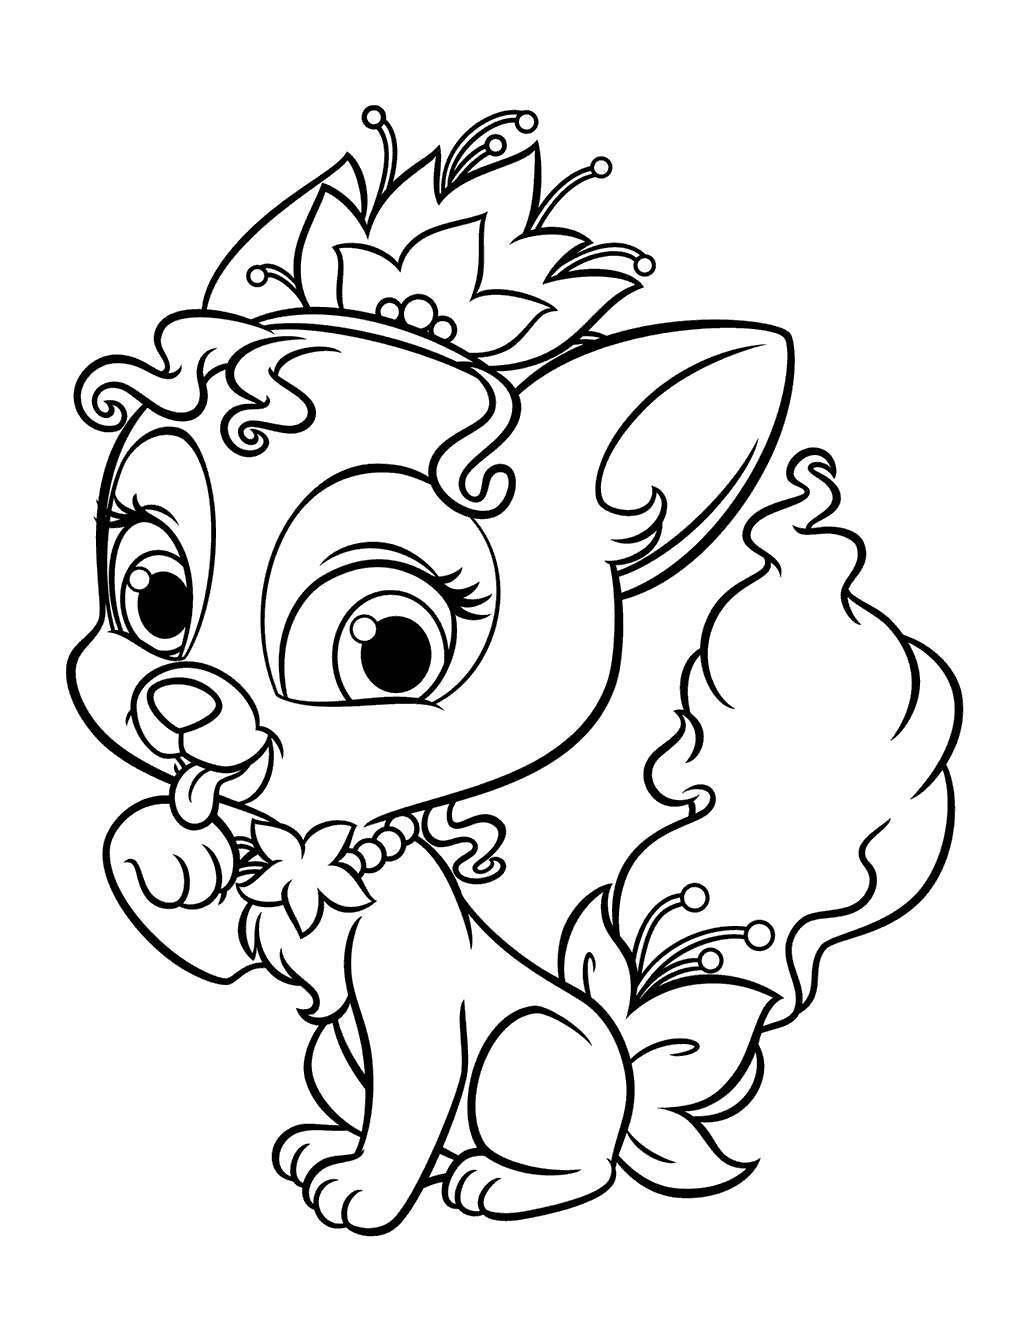 Coloring Pages Of Stuffed Animals Coloring Pages Stunning Princess Palace Pets Coloring Pages